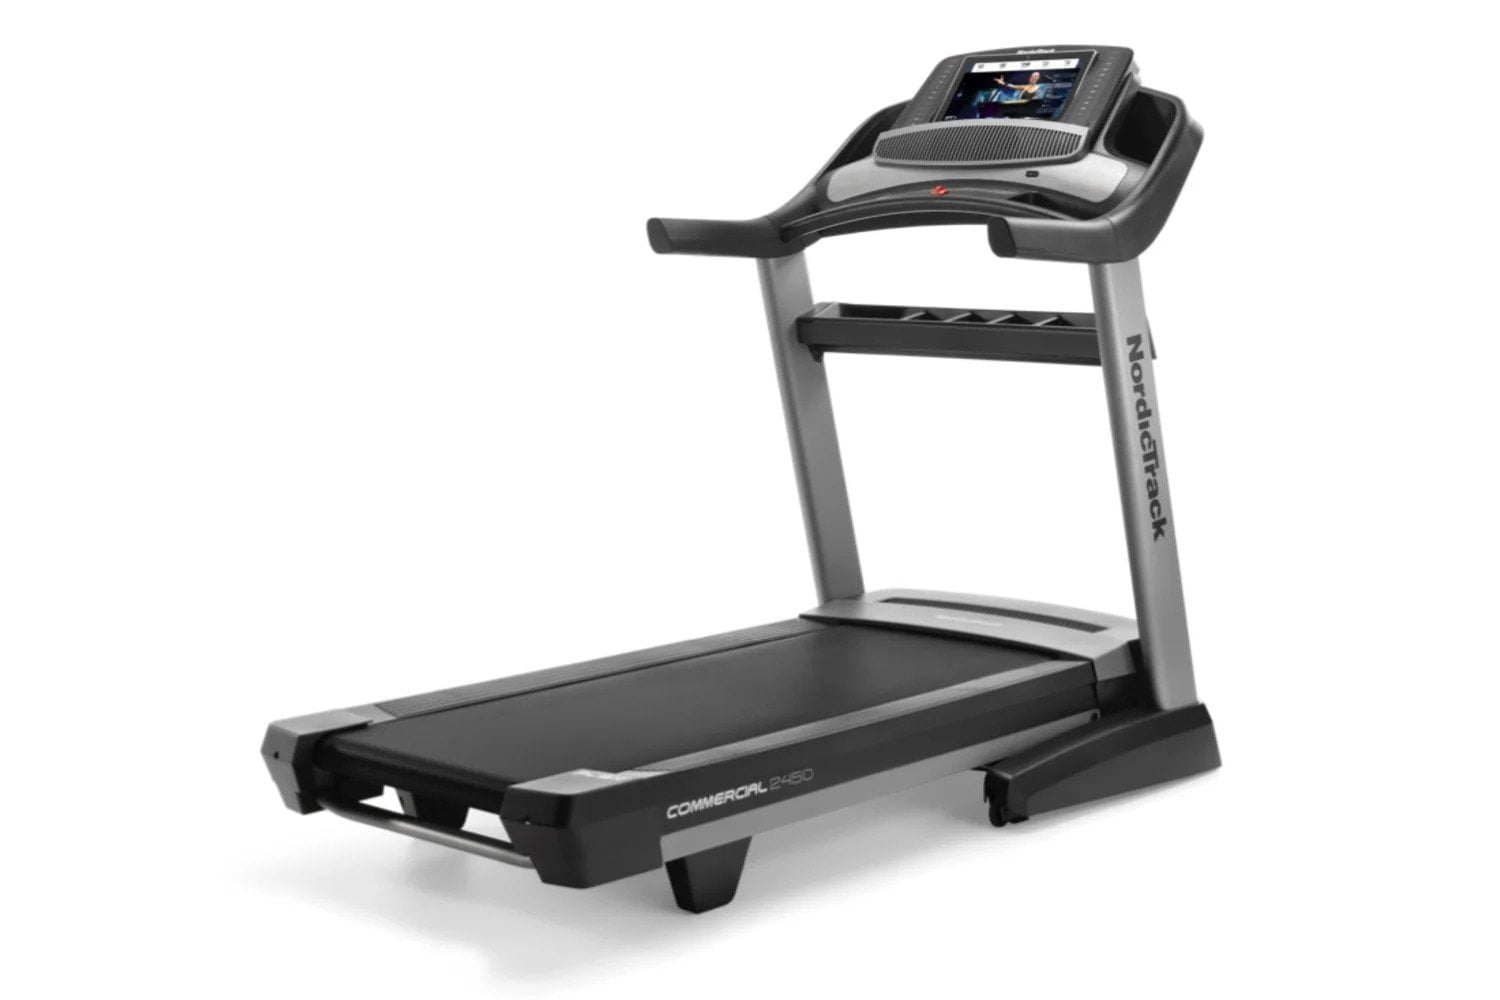 NORDICTRACK COMMERCIAL 2450 TREADMILL REVIEW